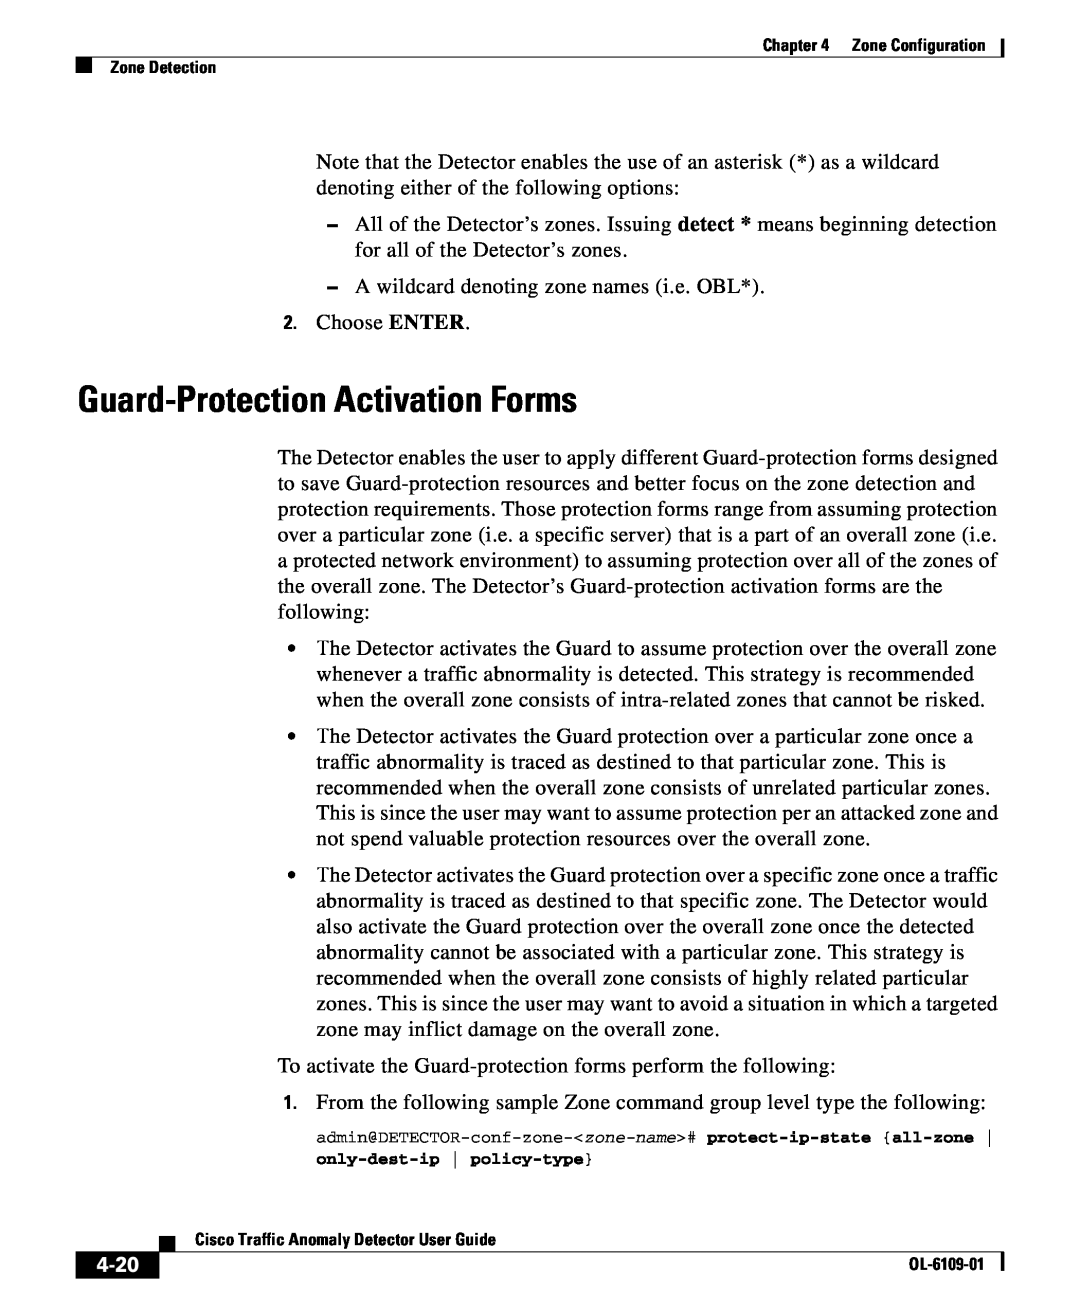 Cisco Systems OL-6109-01 manual Guard-Protection Activation Forms, 4-20, only-dest-ip policy-type 